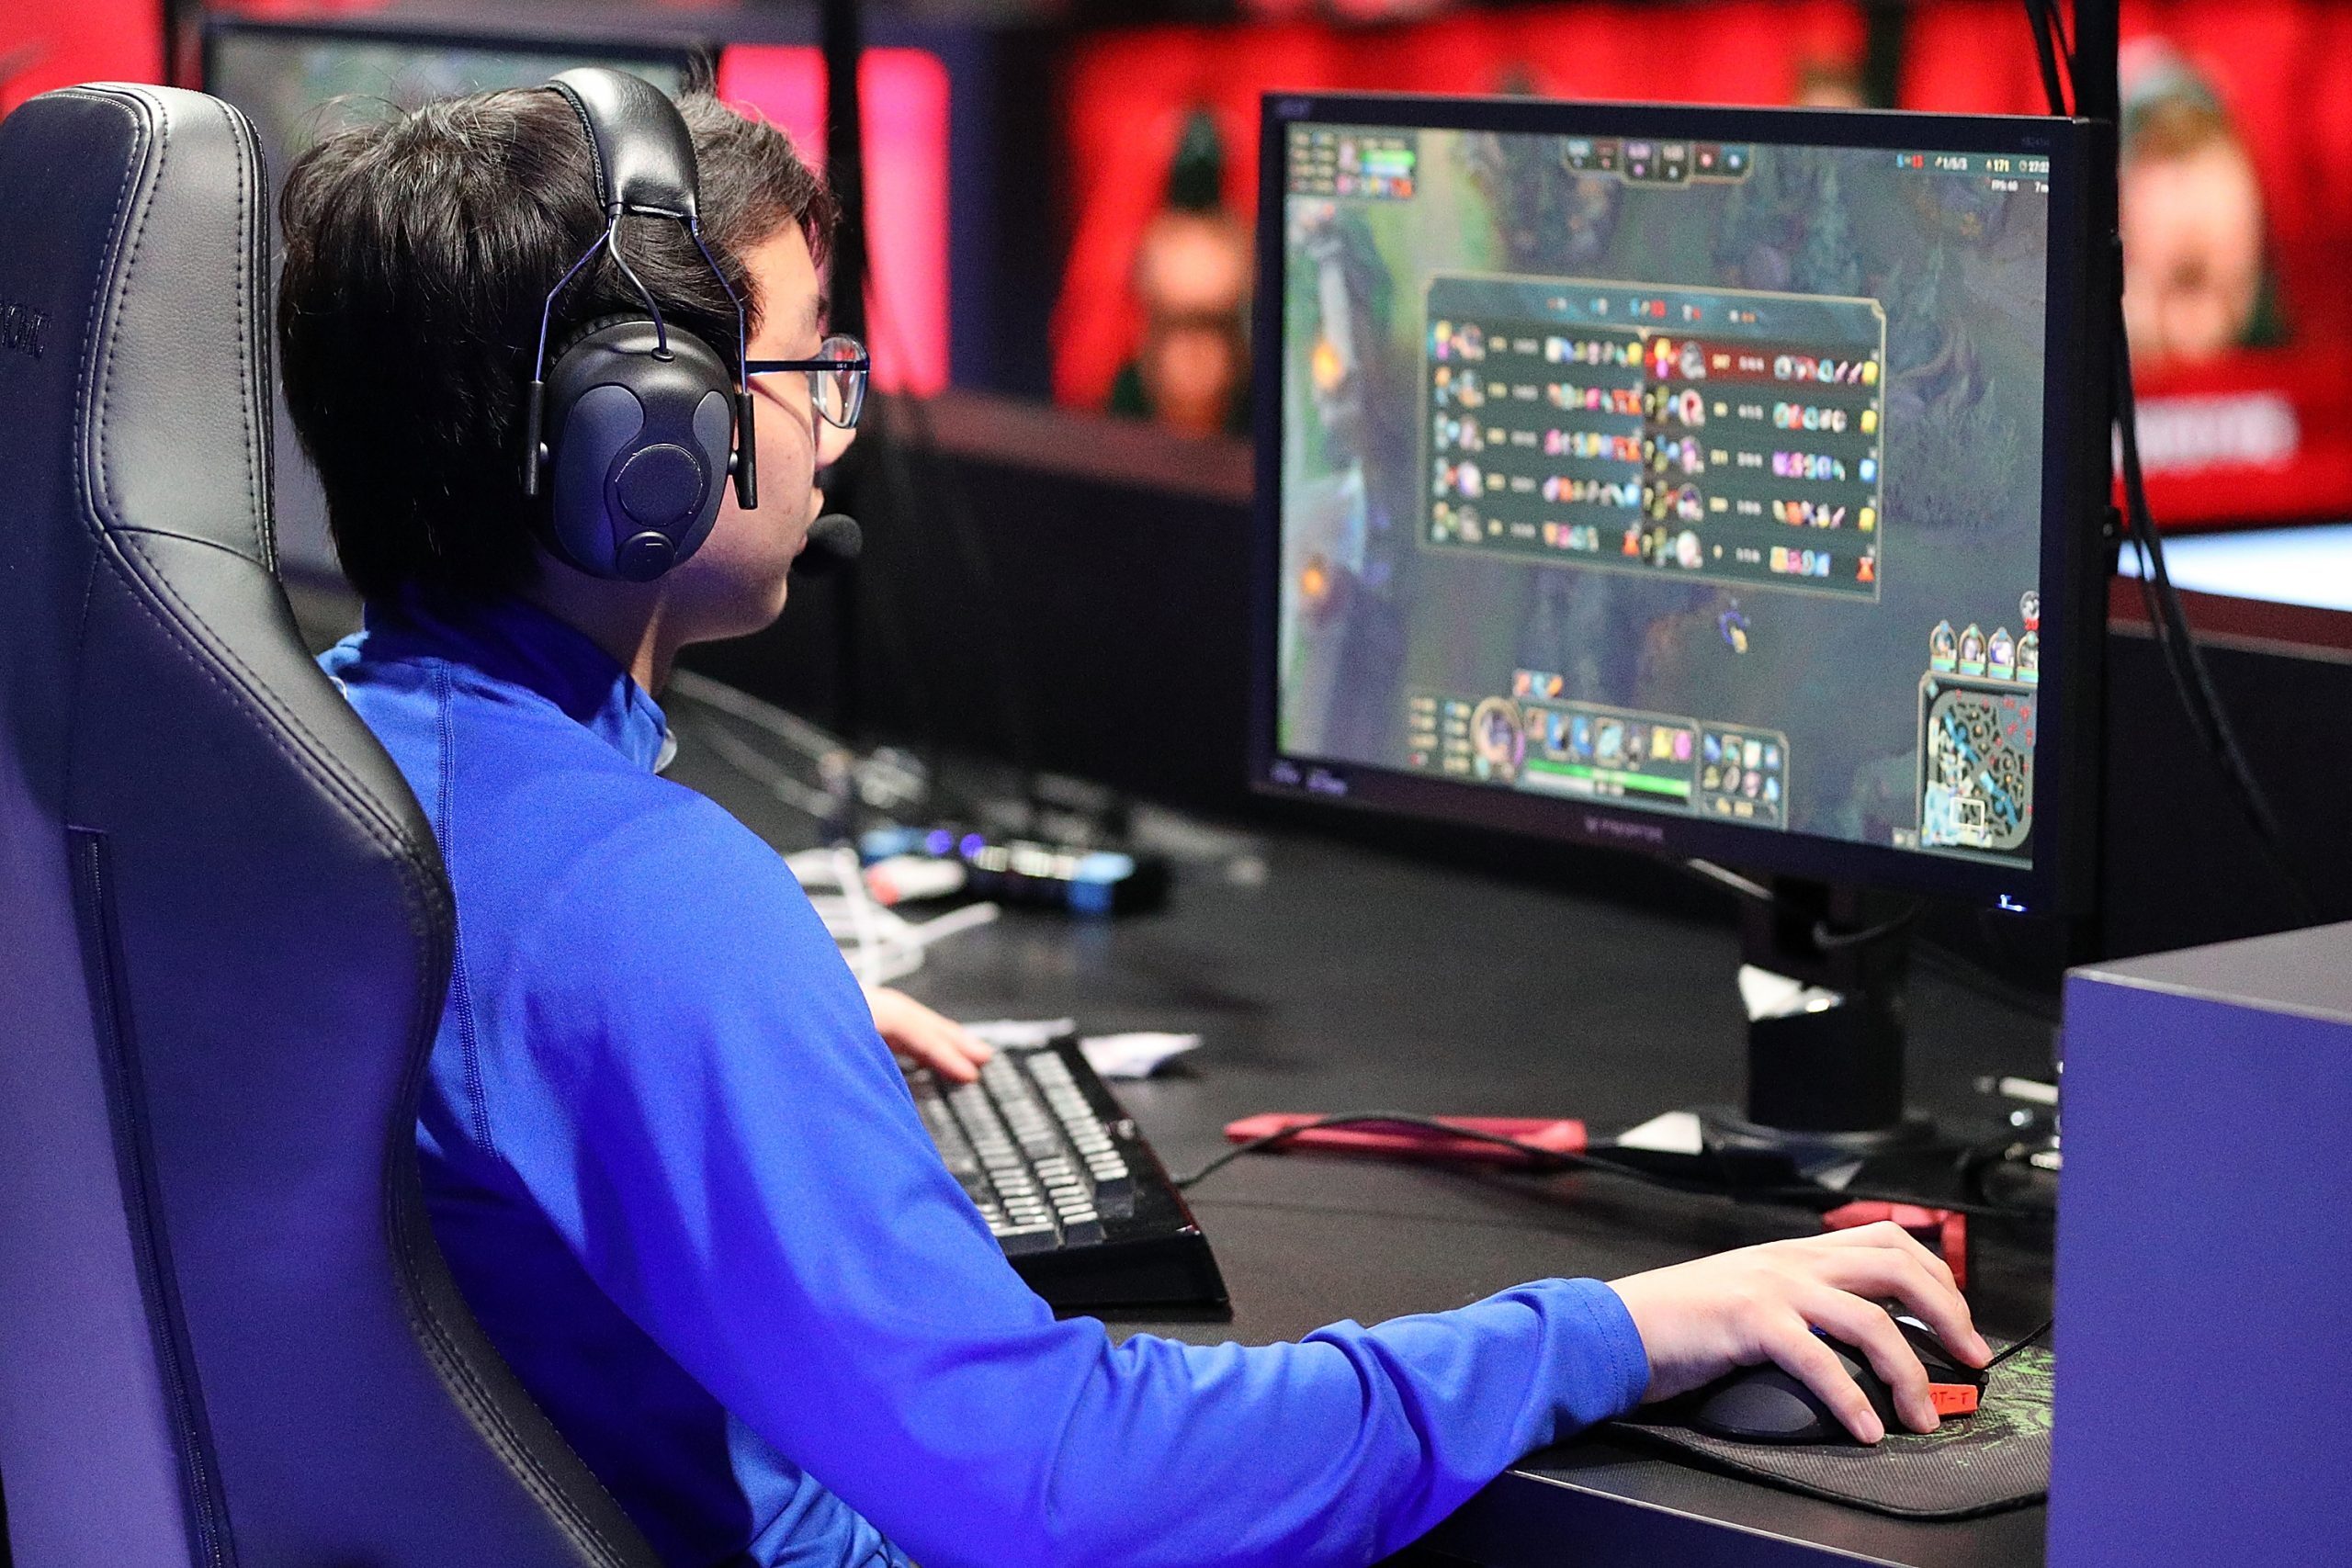 The Queensland University of Technology in Brisbane, Australia will be offering five students $10,000 scholarships in League of Legends. (Photo courtesy of Josh Lefkowitz